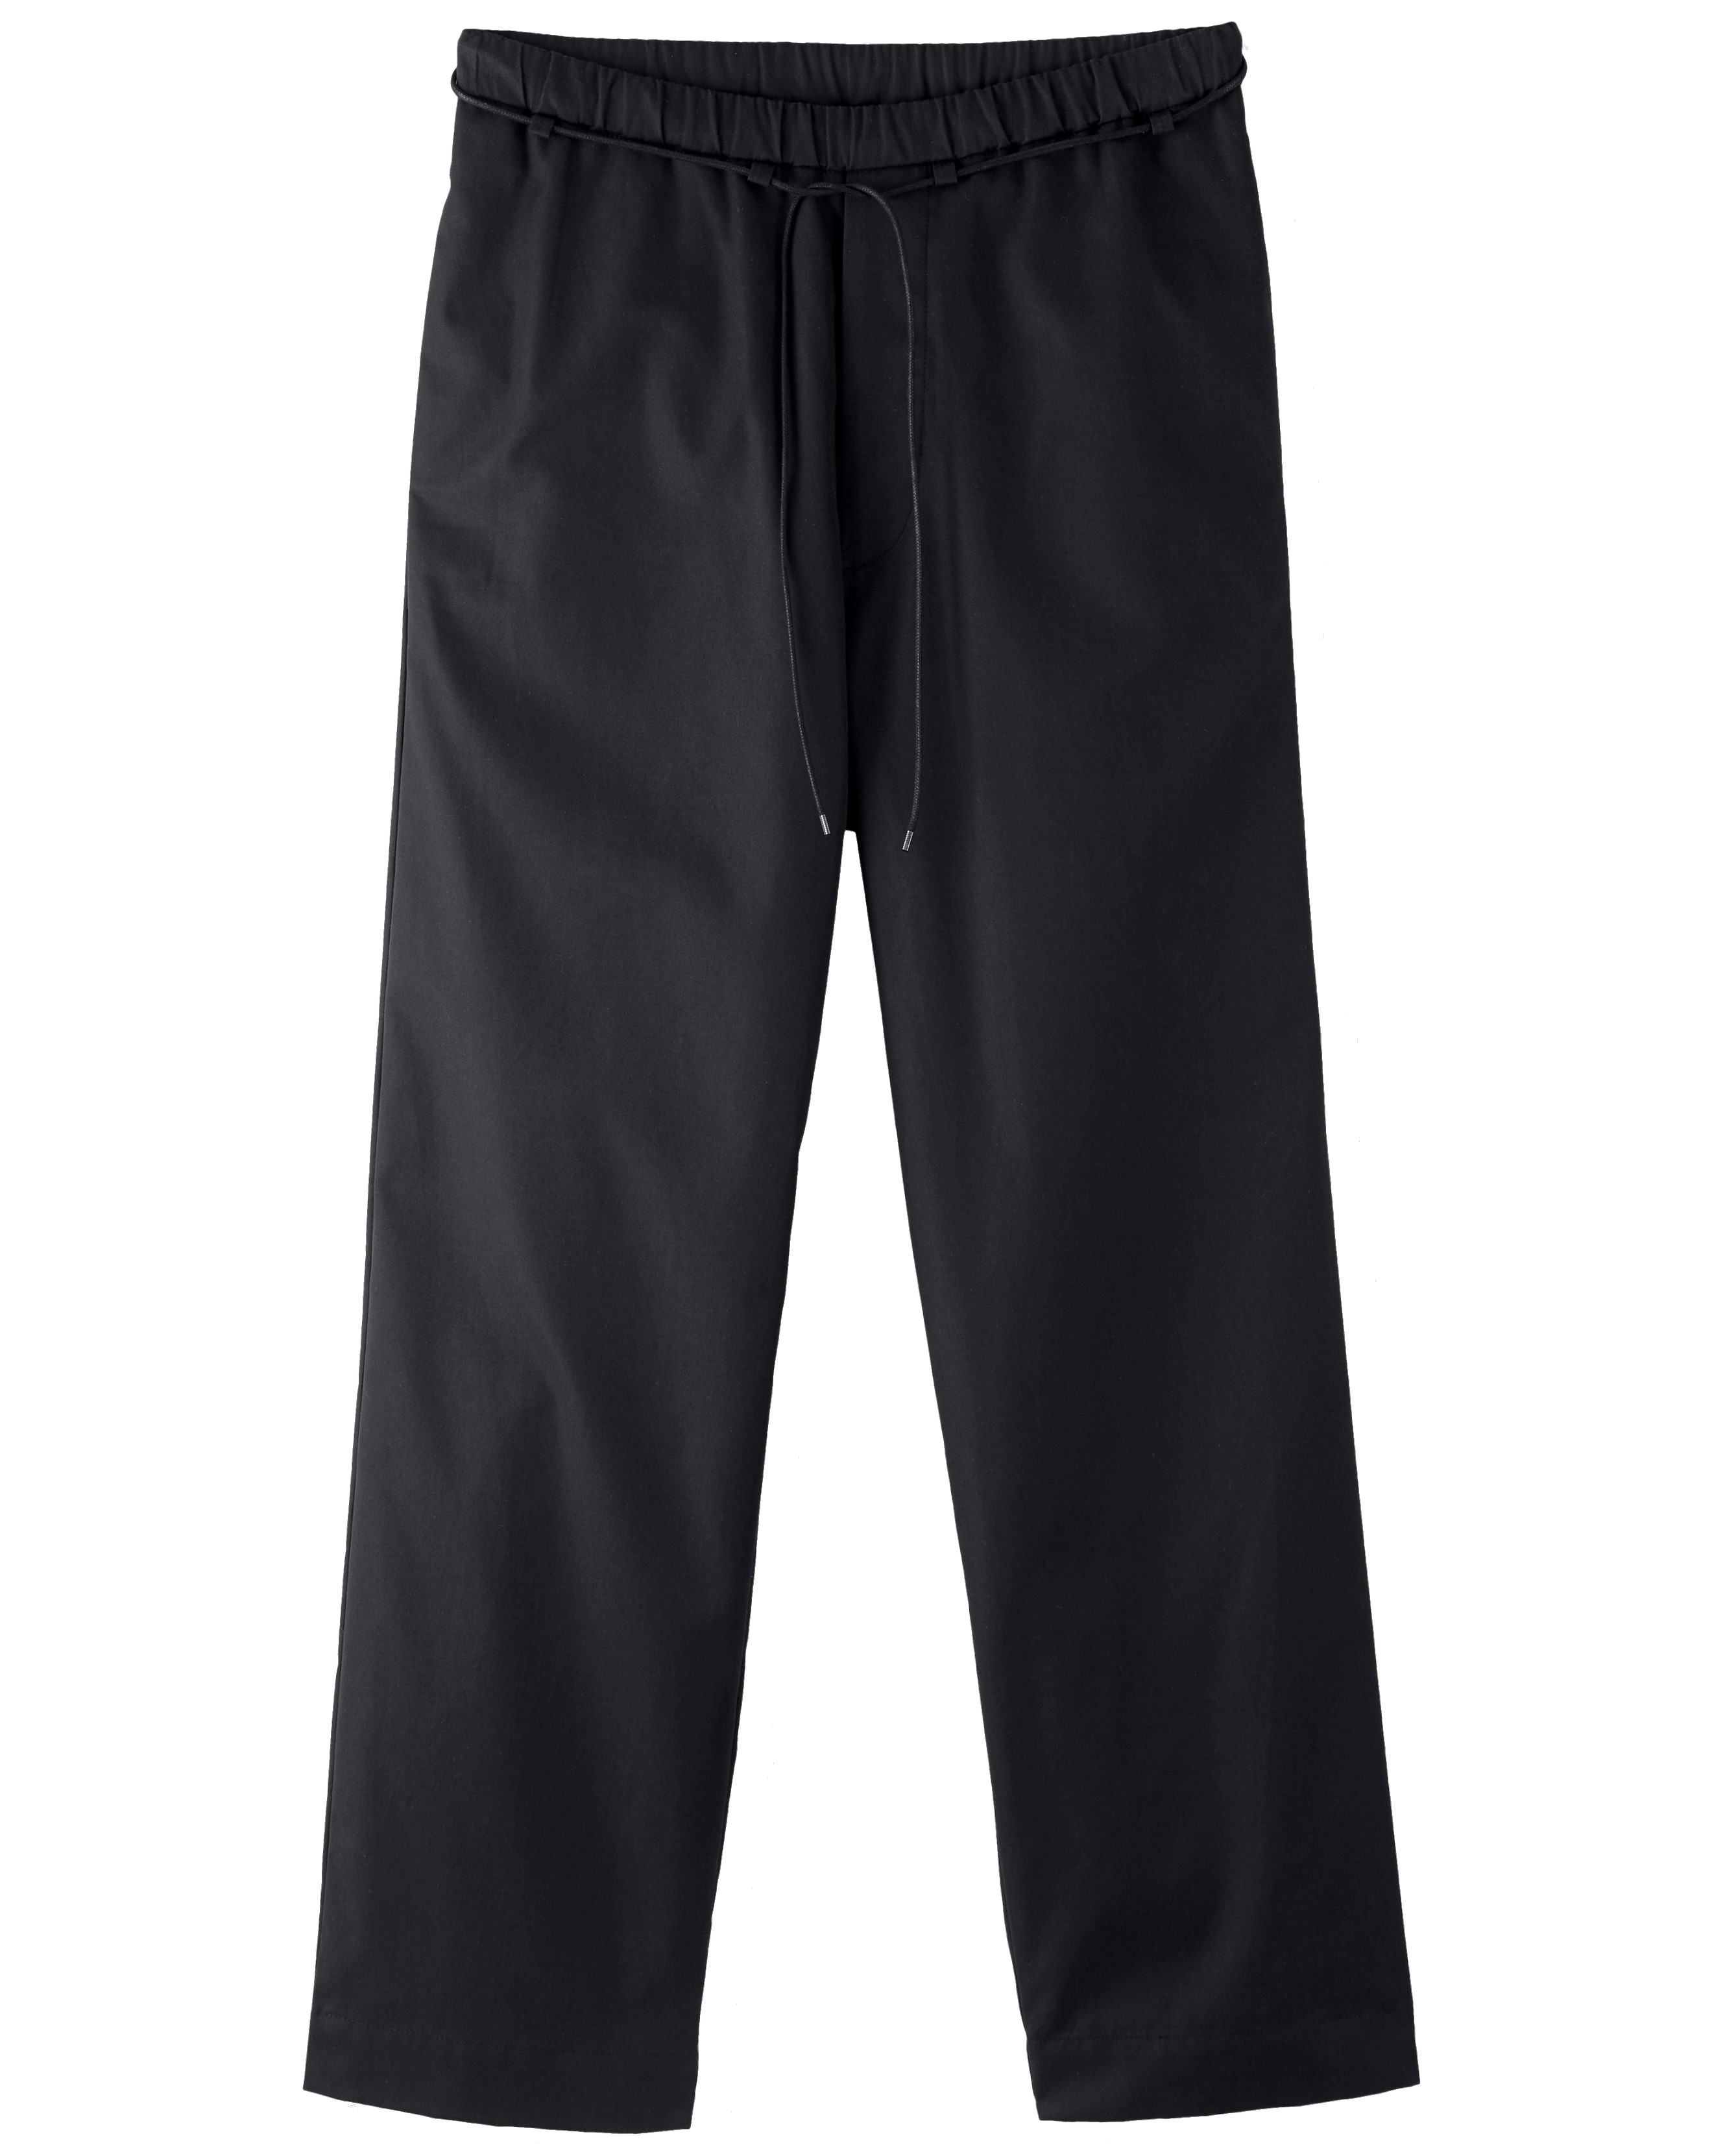 APPLIED ART FORMS Drawstring Pant in Black 46